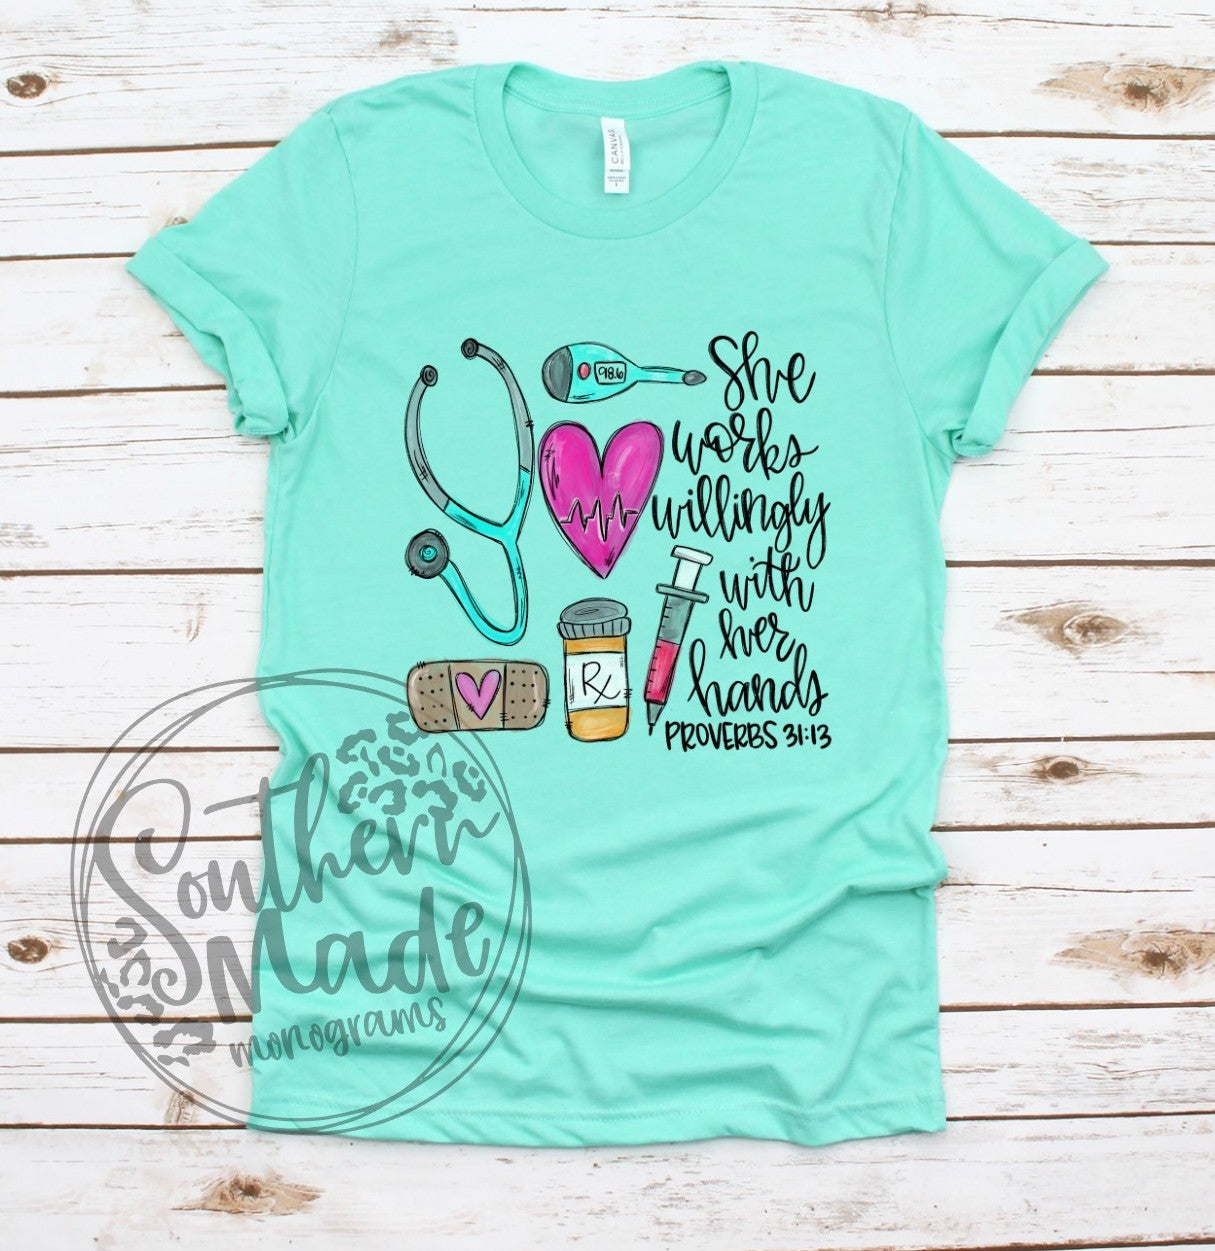 Nurse - She Works Willingly With Her Hands Proverbs 31:13 - Tee, Tank or Raglan